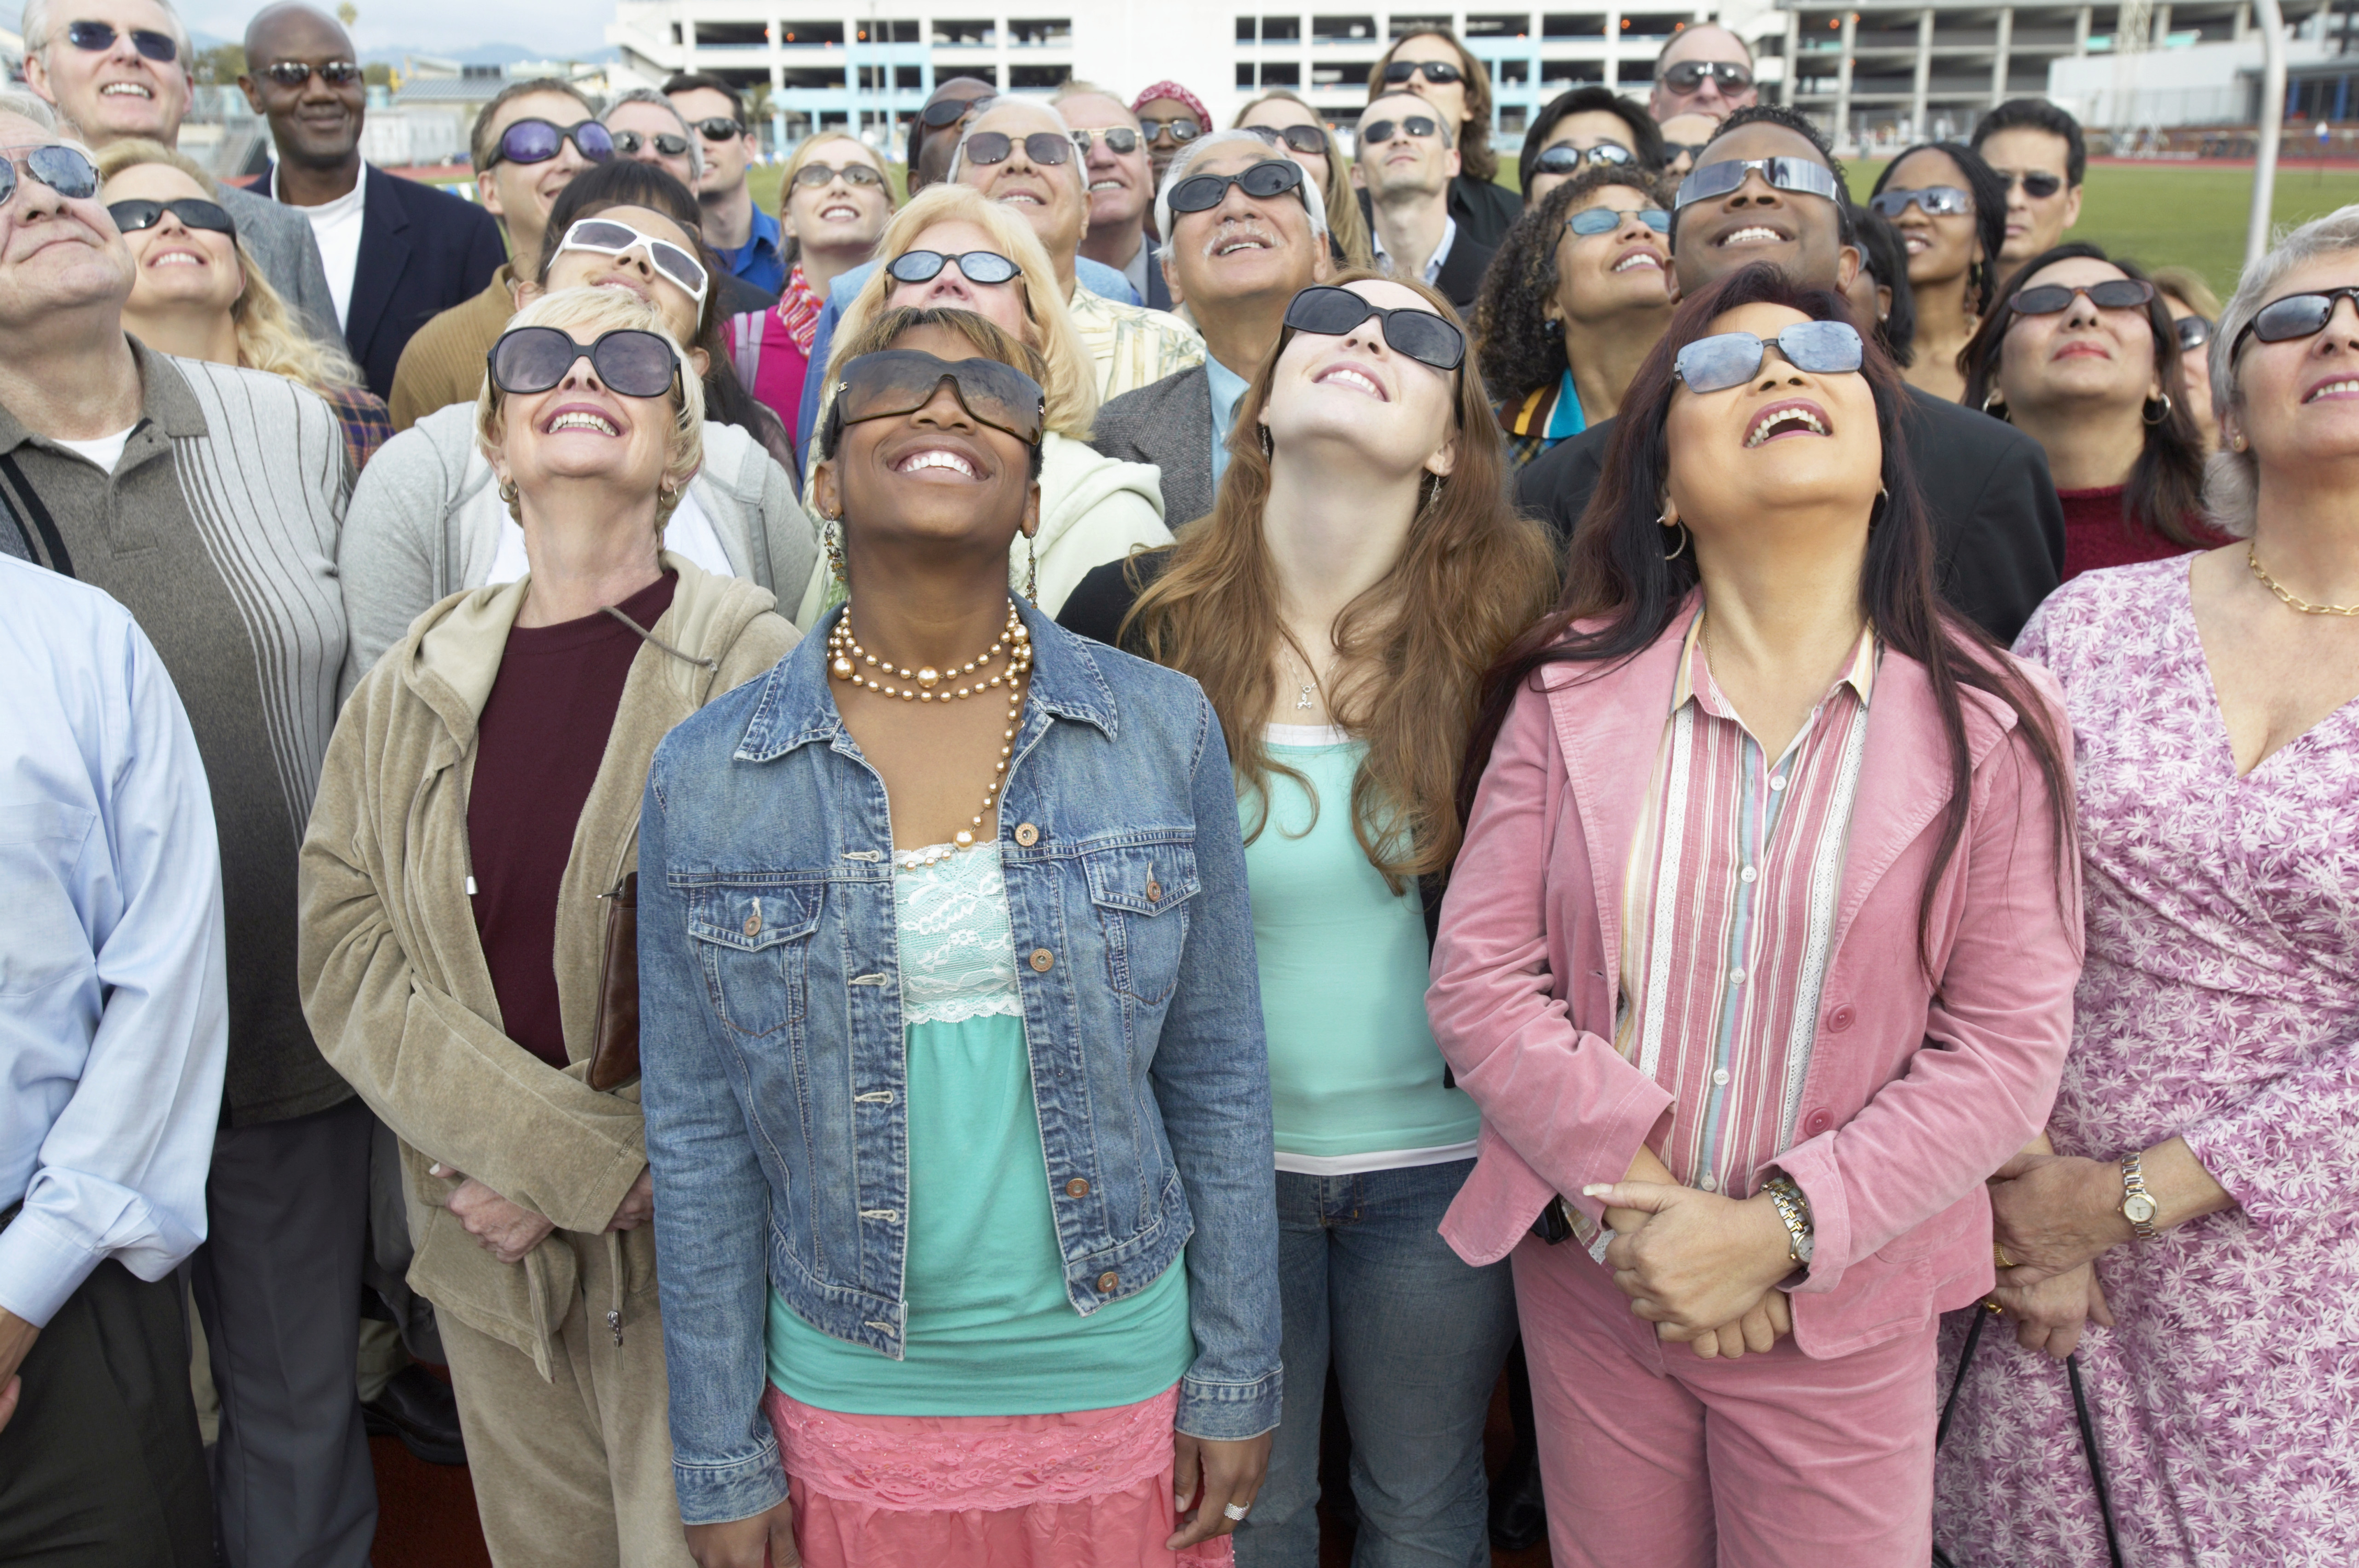 How did people react to the eclipse viewing experience?